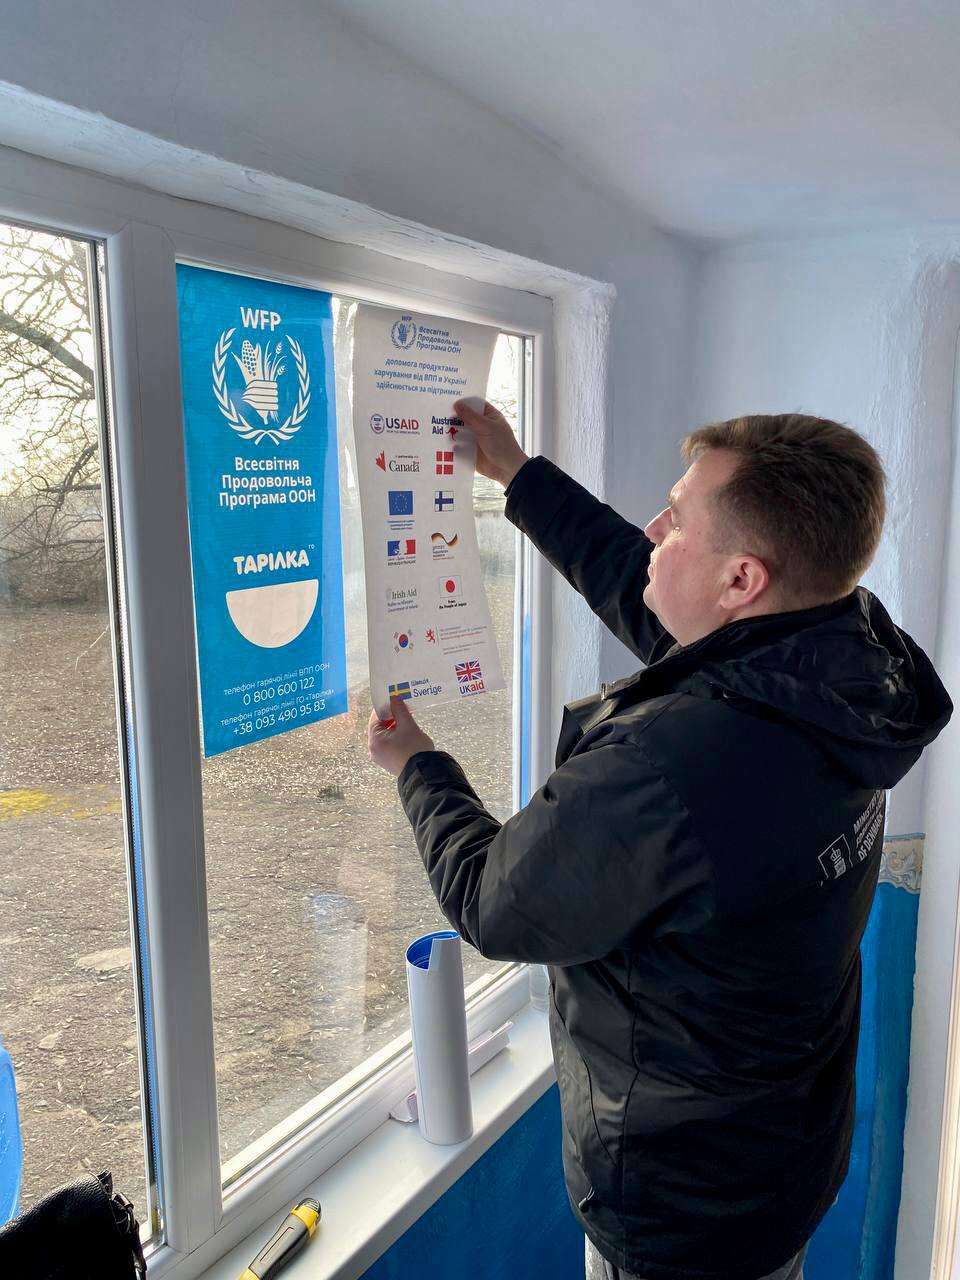 🙋The Shchedryk Charitable Foundation team, together with the NGO “Tarilka” and the WFP (World Food Programme), continues humanitarian activities in Mykolaiv region!